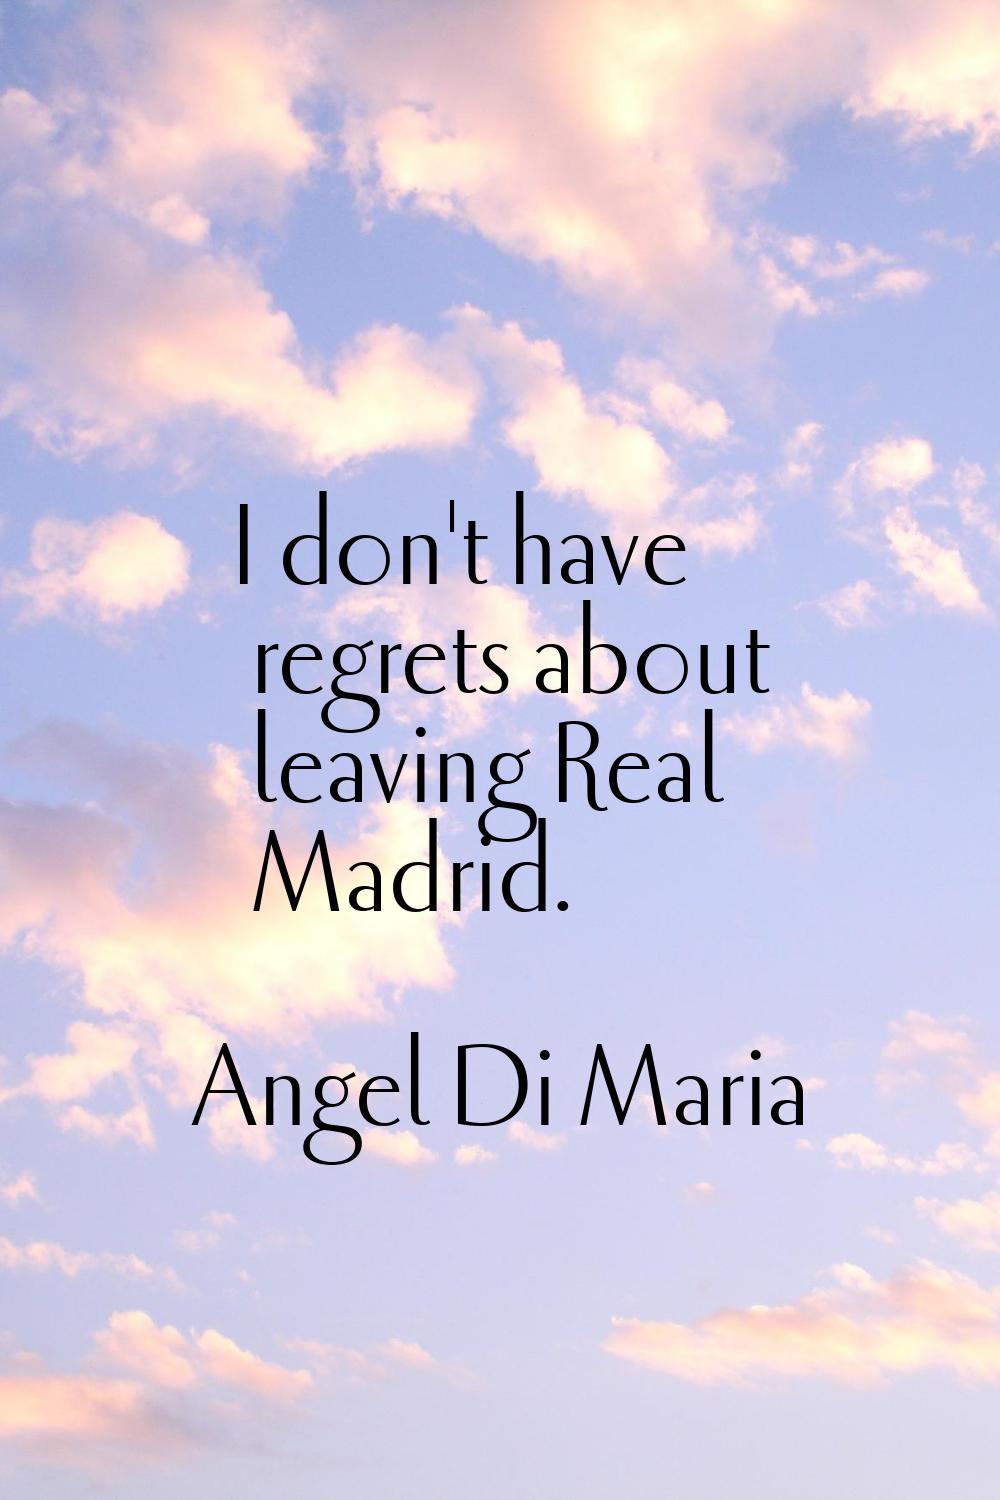 I don't have regrets about leaving Real Madrid.